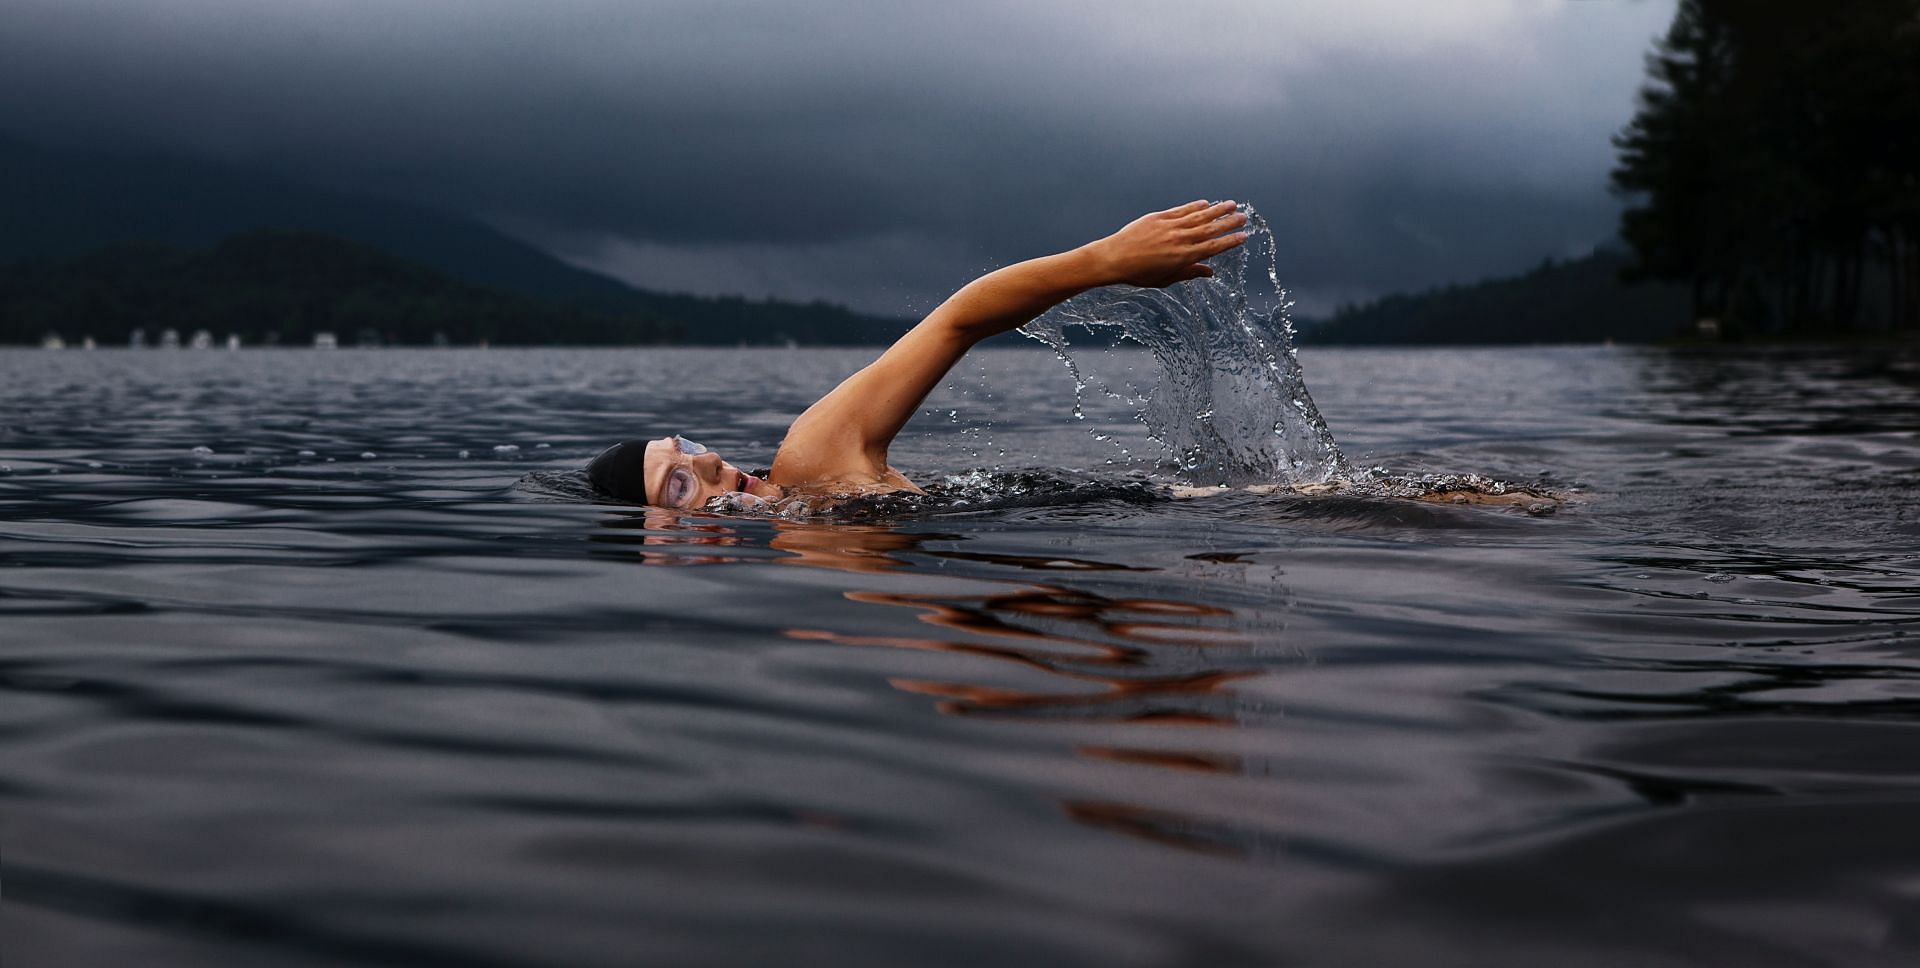 Although its beneficial, swimming can be very risky for you if you have heart conditions. (Image by Todd Quackenbush / Unspalsh)